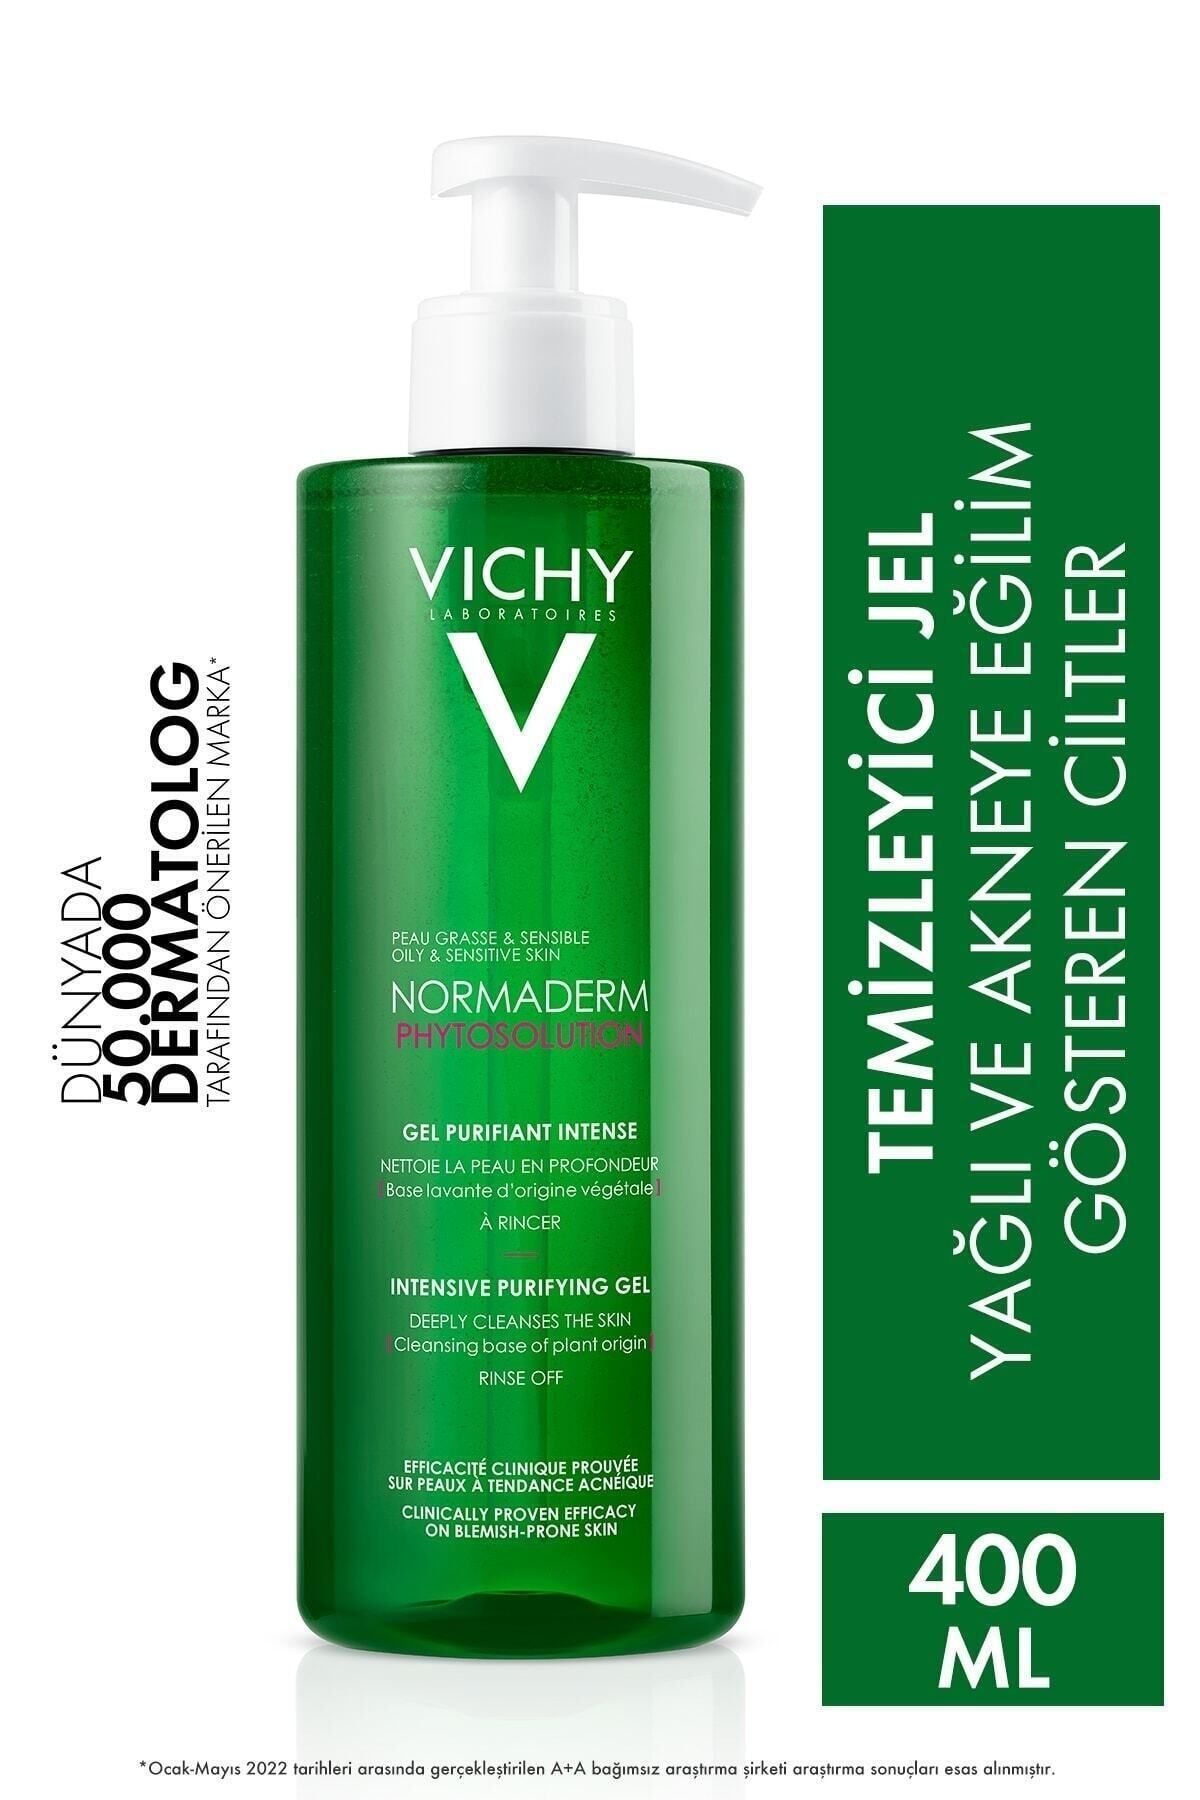 Vichy OILY-COMBINARY SKIN NORMADERM SKİN BRİGHTENİNG FACE CLEANING GEL 400 ML